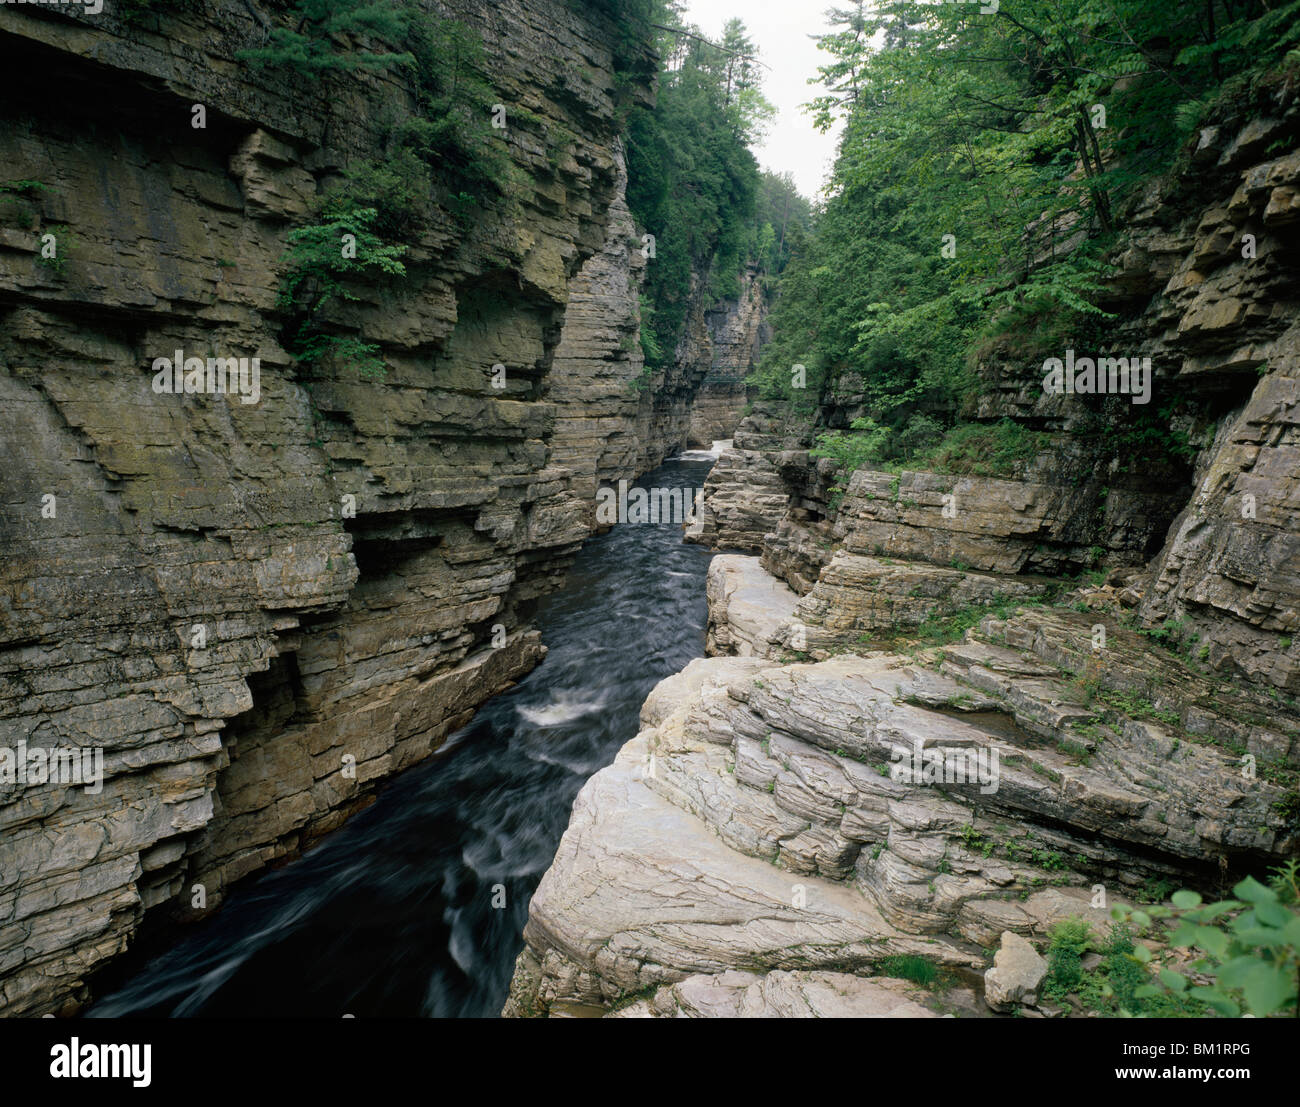 River flowing through a gorge, Ausable River, Ausable Chasm, Keeseville, New York State, USA Stock Photo